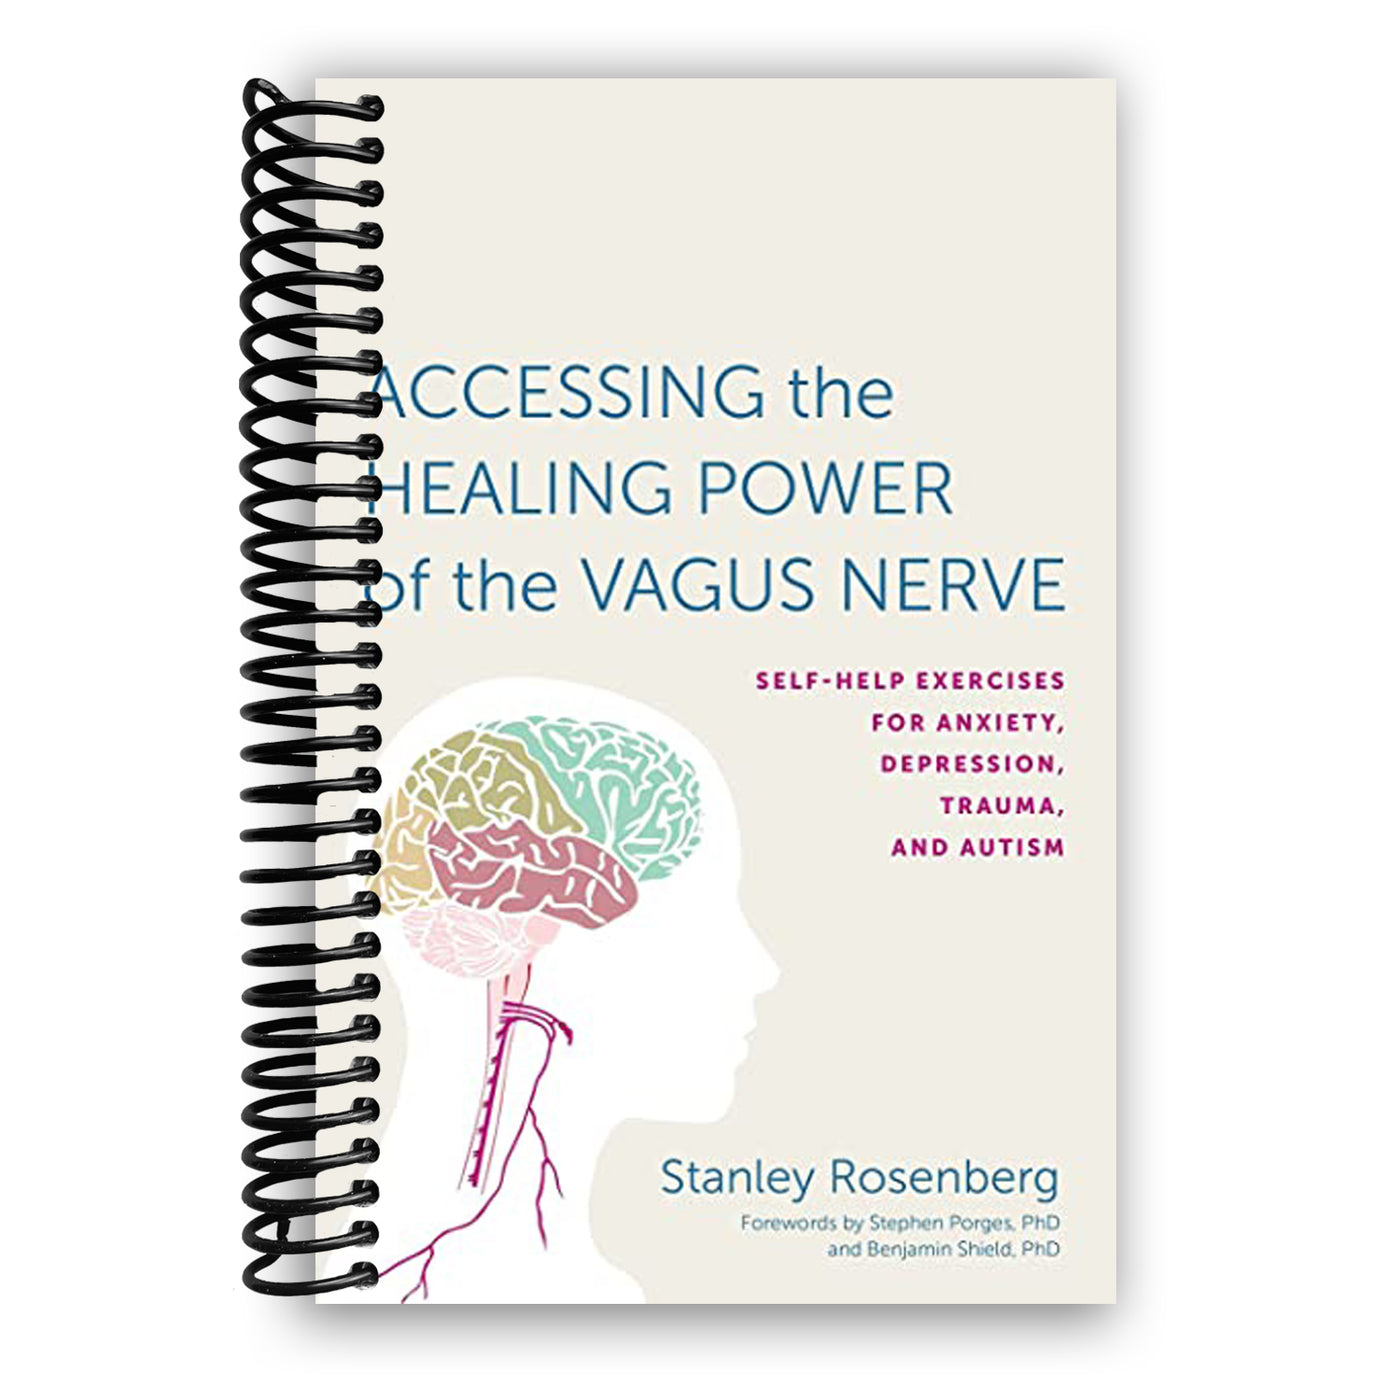 Accessing the Healing Power of the Vagus Nerve: Self-Help Exercises for Anxiety, Depression, Trauma, and Autism (Spiral Bound)